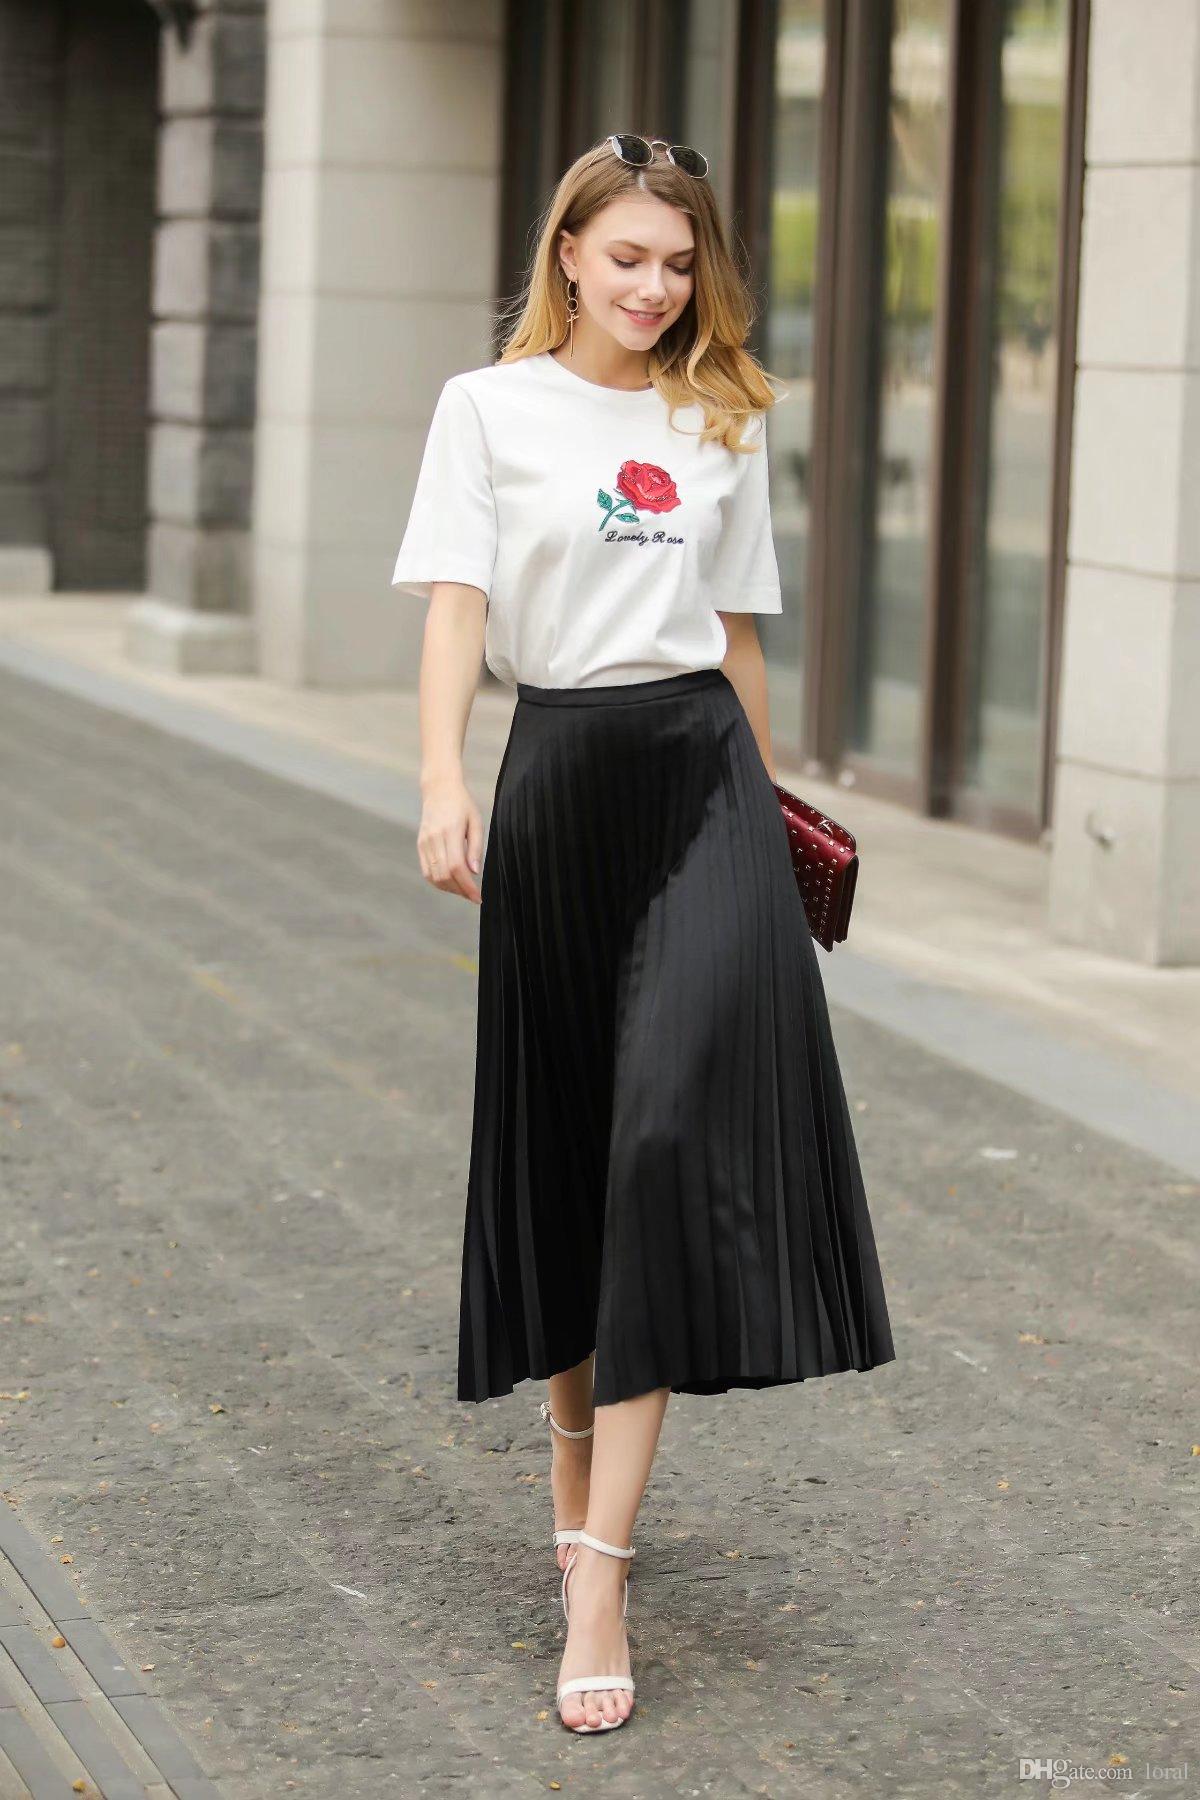 2019 Womens Classic Long Skirts Summer Spring Autumn Sweet Female Casual  Mid Calf A Line Pleated Skirt From Loral, $40.45 | Traveller Location